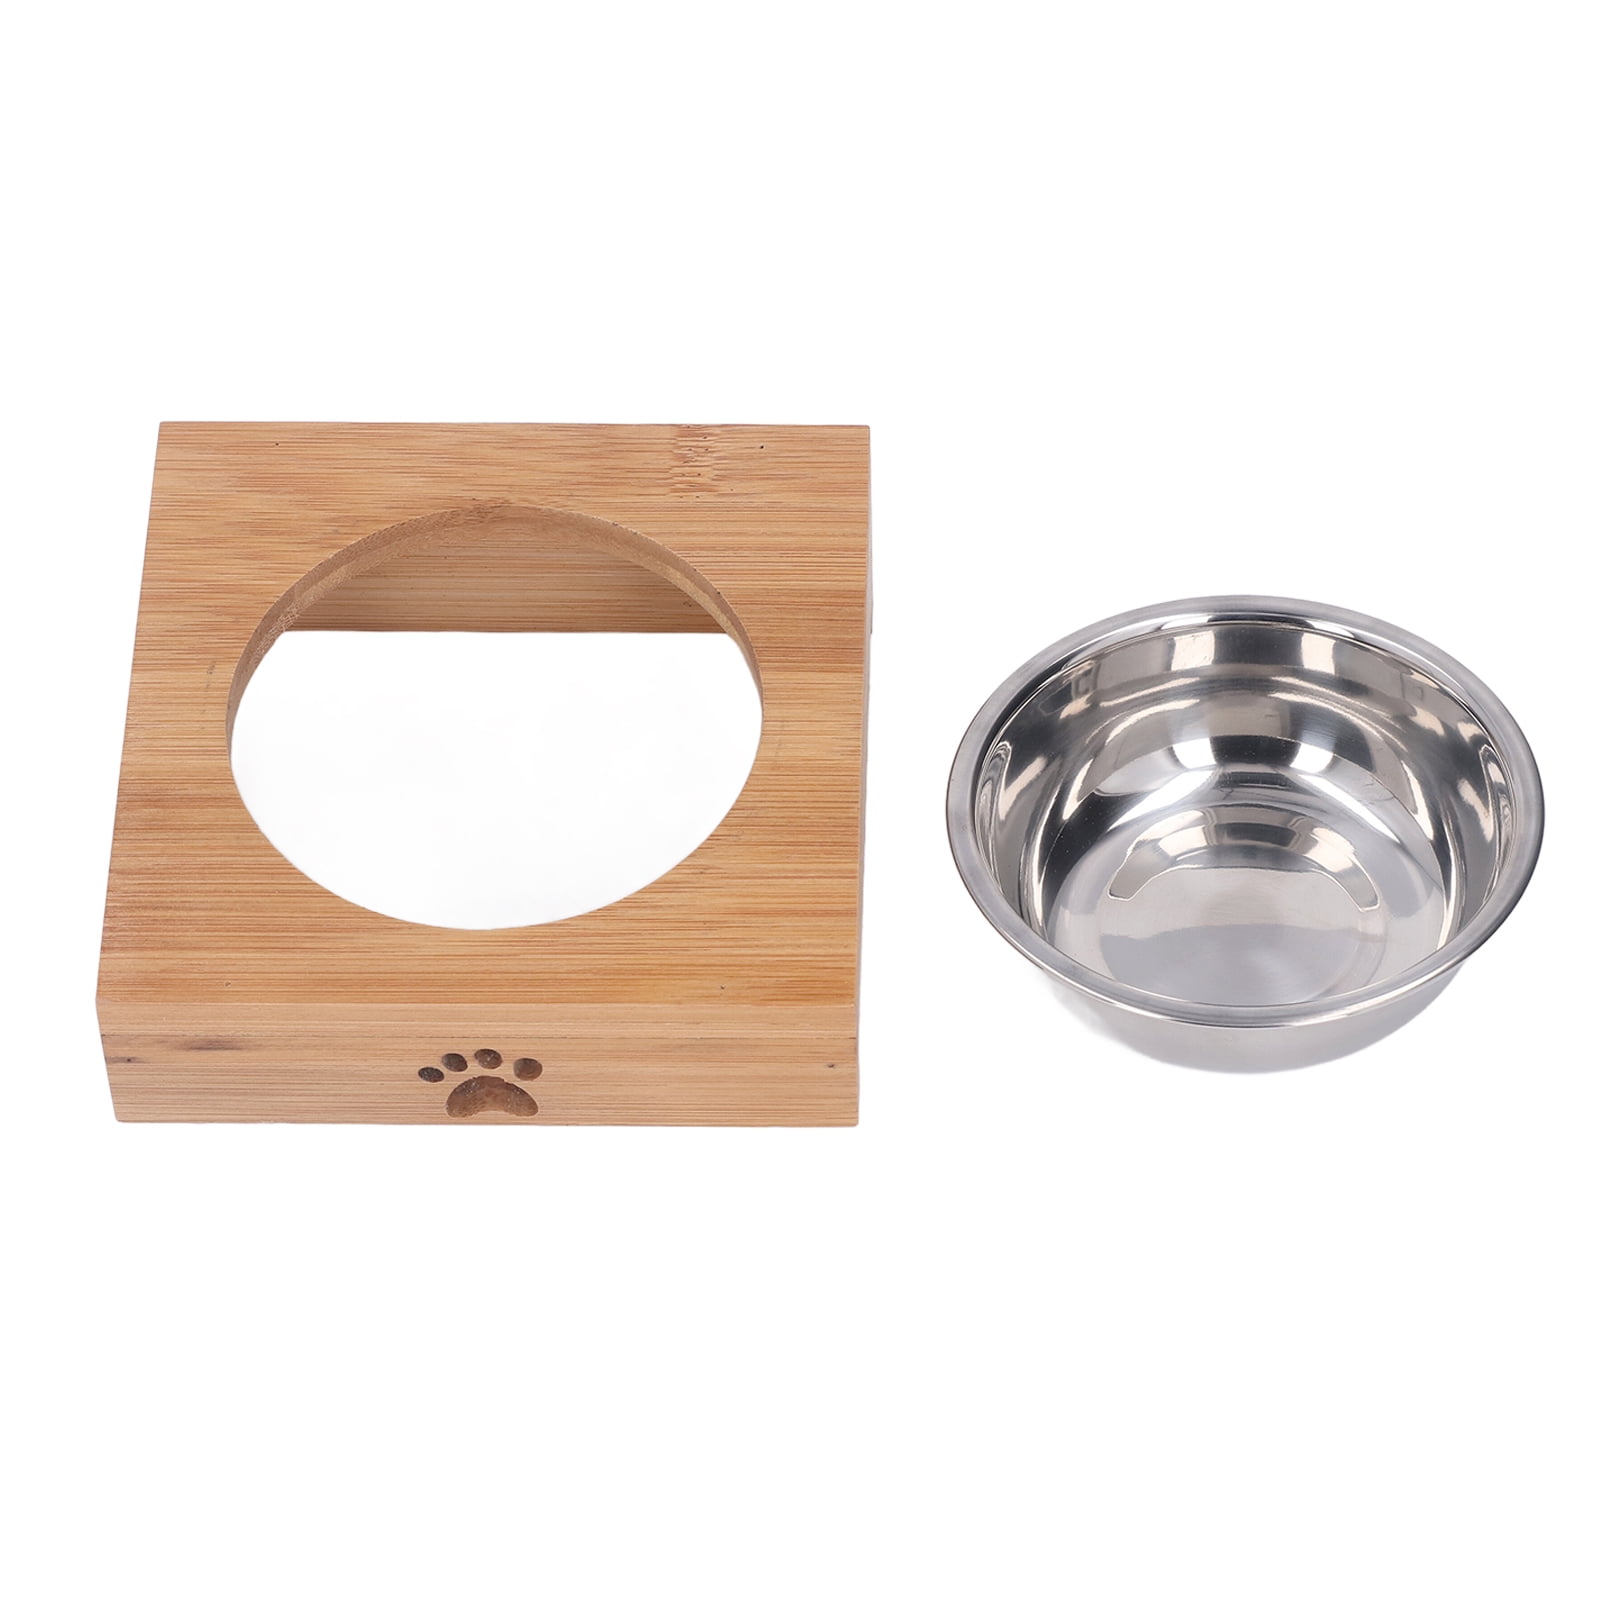 BEAUTYZOO Elevated Dog Bowls with Stand for Small Dogs Cats, Raised Bowls  for Food and Water Indoor, Pets Feeder Stand with 2 Stainless Steel Dog